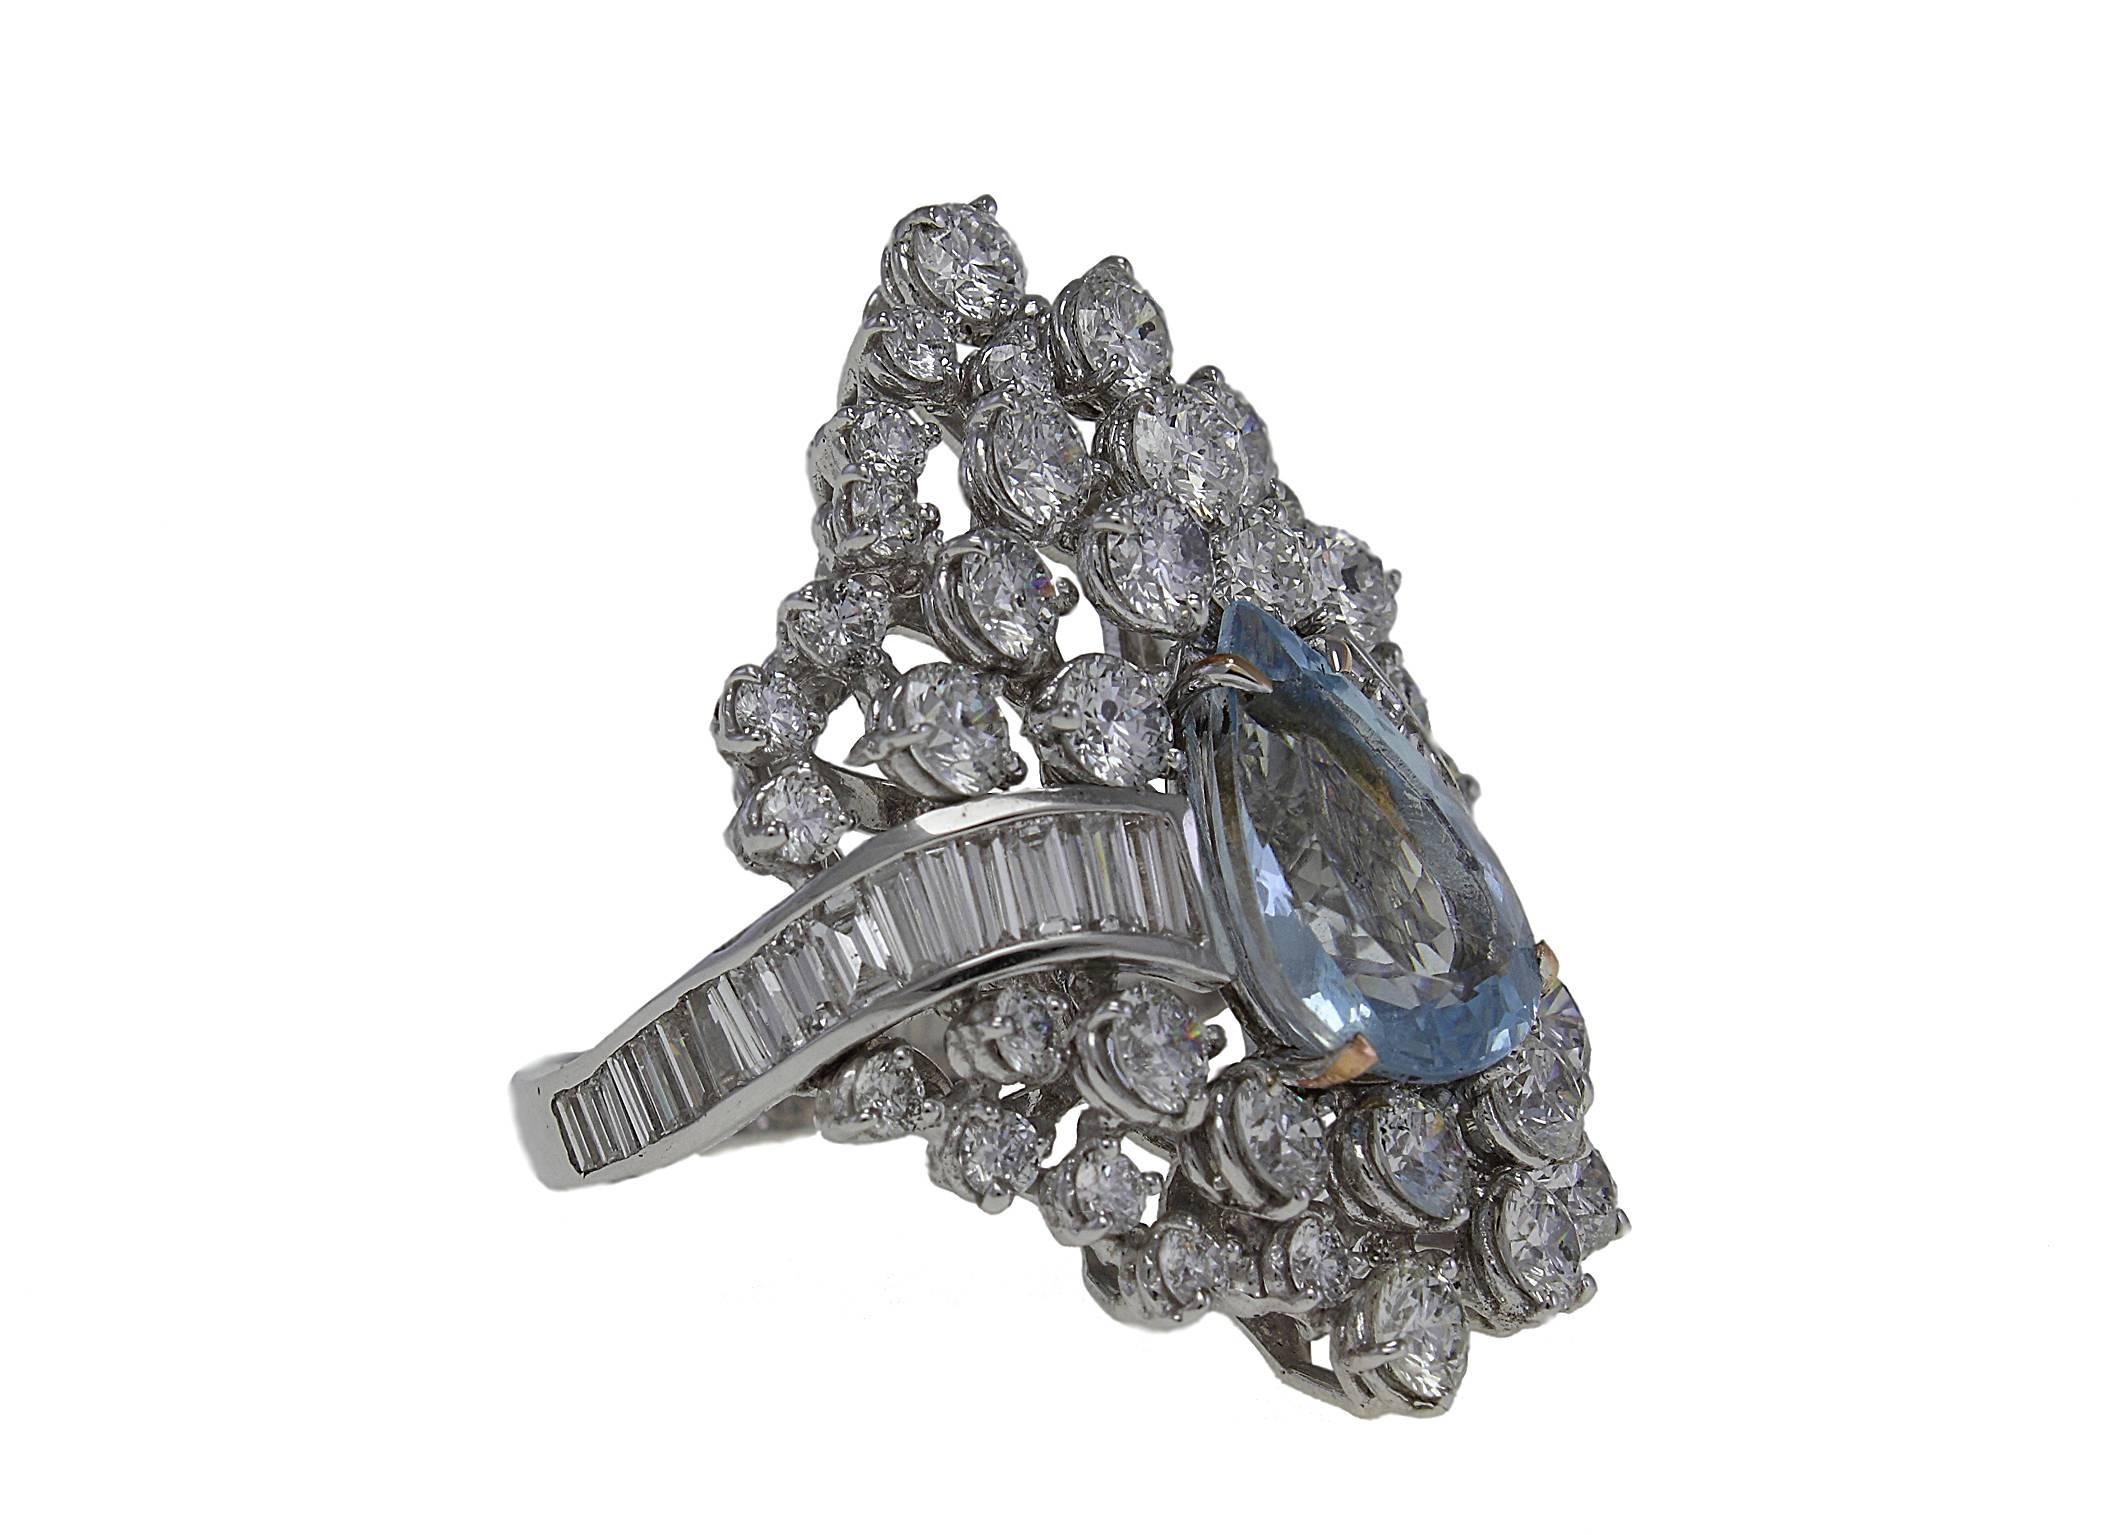 Shiny ring in 14 Kt white gold covered in diamonds and baguette cut diamonds that surround a central aquamarine drop.

diamonds  4.18kt
baguette cut diamonds 1.45kt
aquamarine  3.3kt  
tot weight 13.8gr
US Size
Width 0.98 in
Length 1.37 in
Diameter